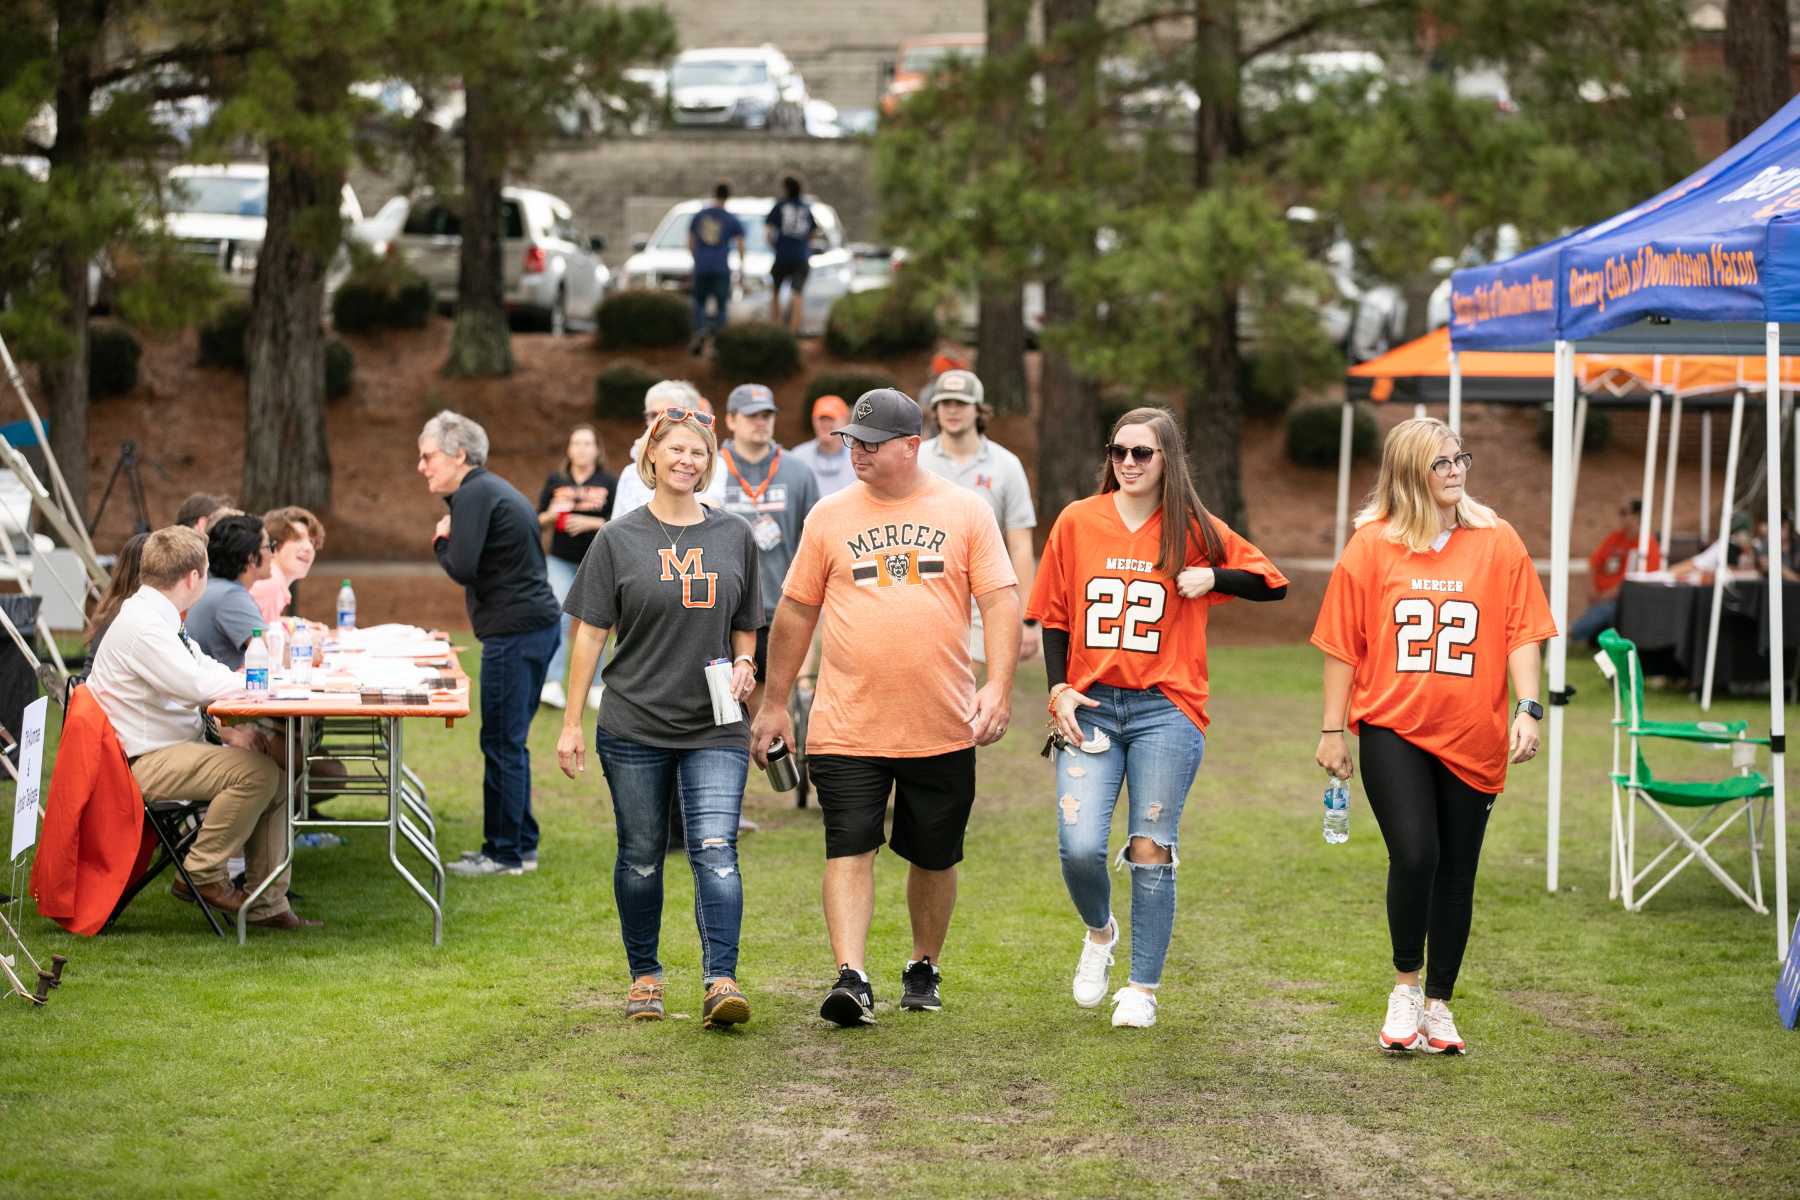 a man and woman wearing mercer shirts, and two young women wearing mercer jerseys, walk onto black field